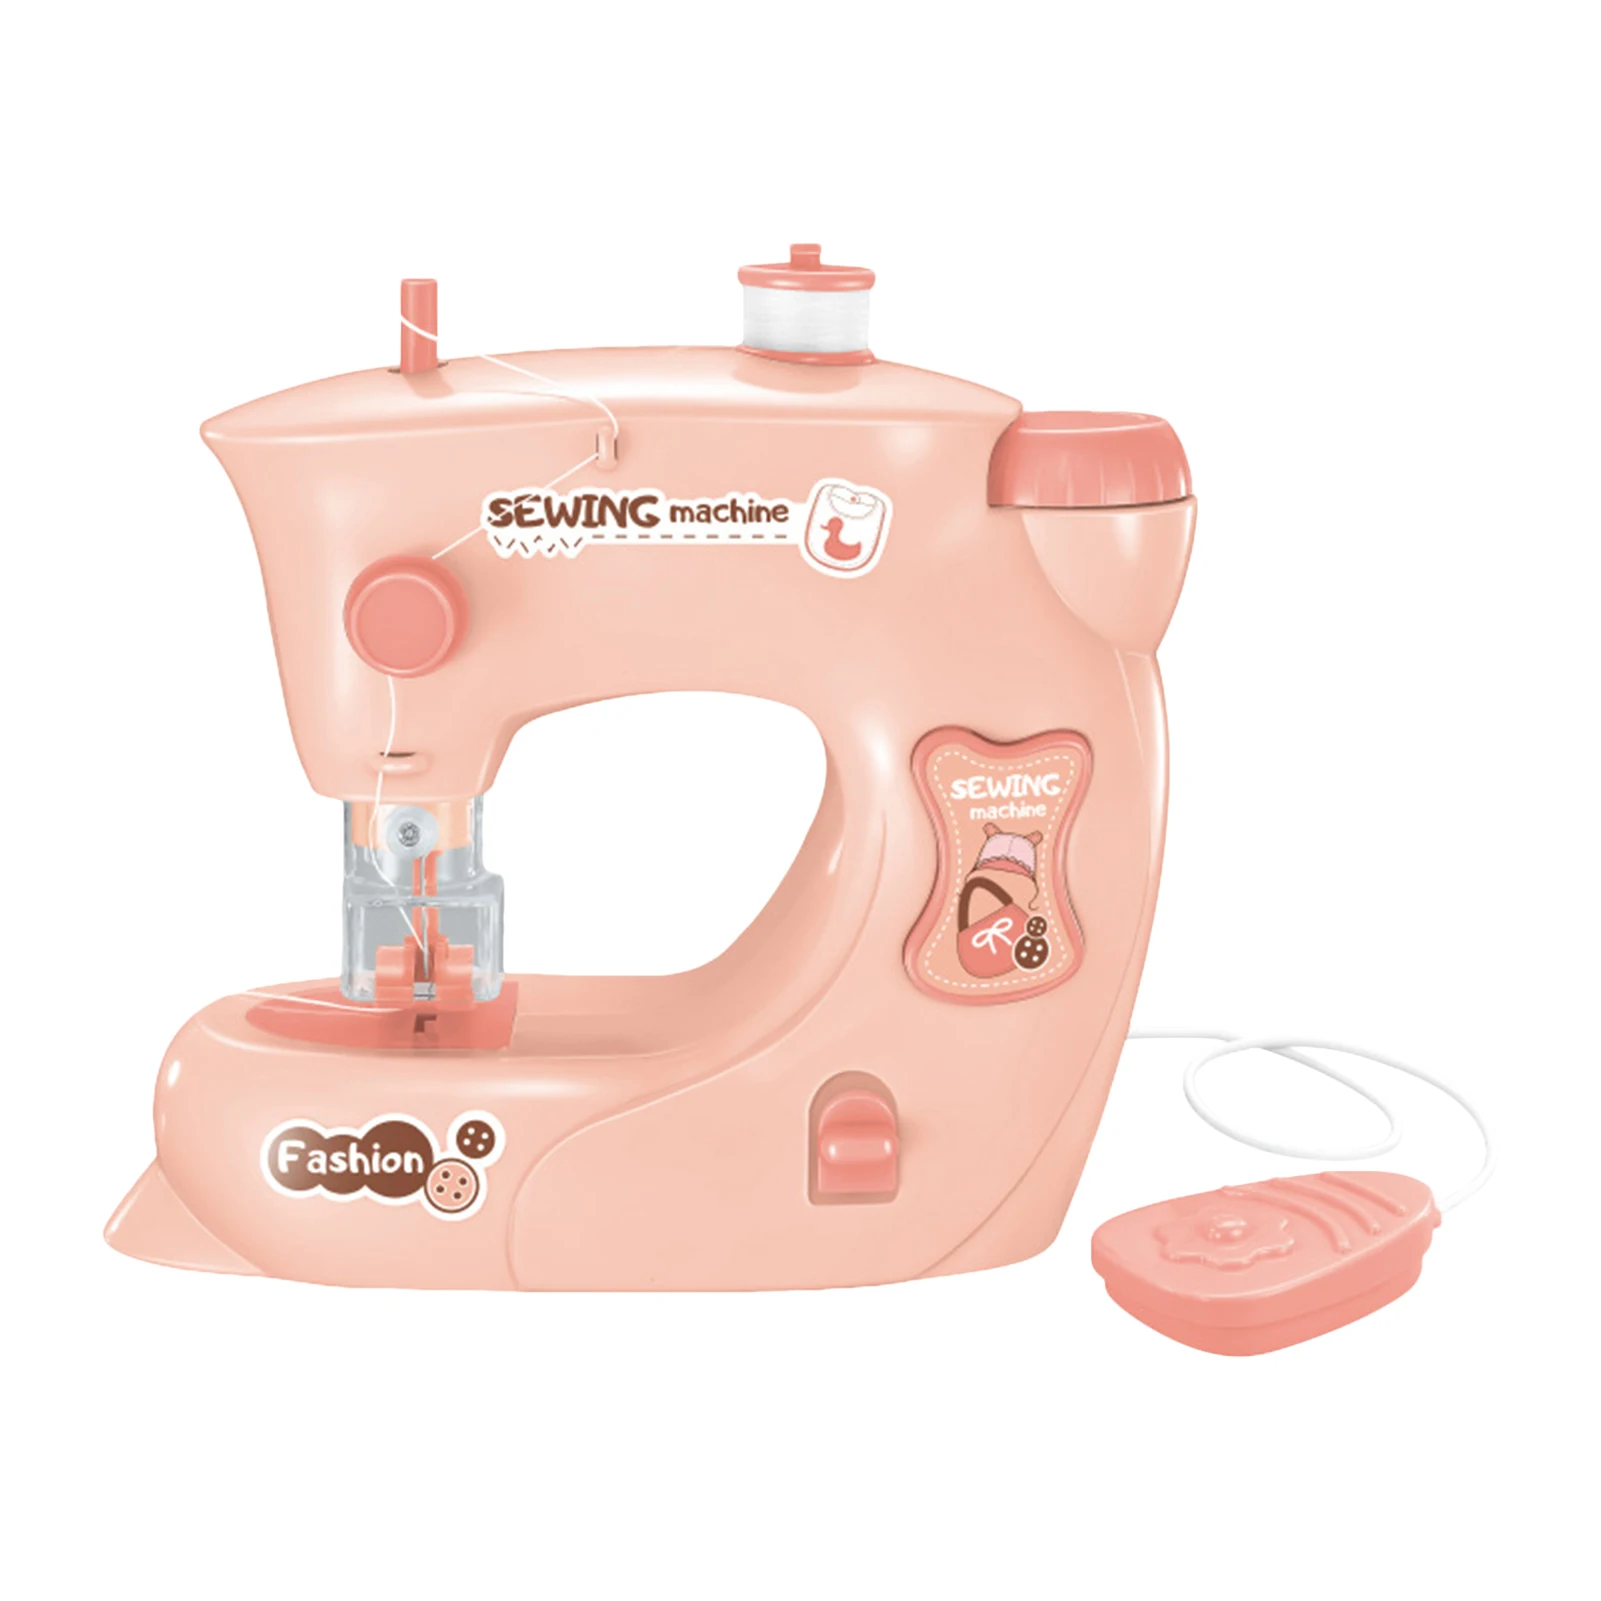 Kids Simulation Small Appliances Role Play House Game Kids Portable Sewing Machine Children Educational Interactive Toy For Gift